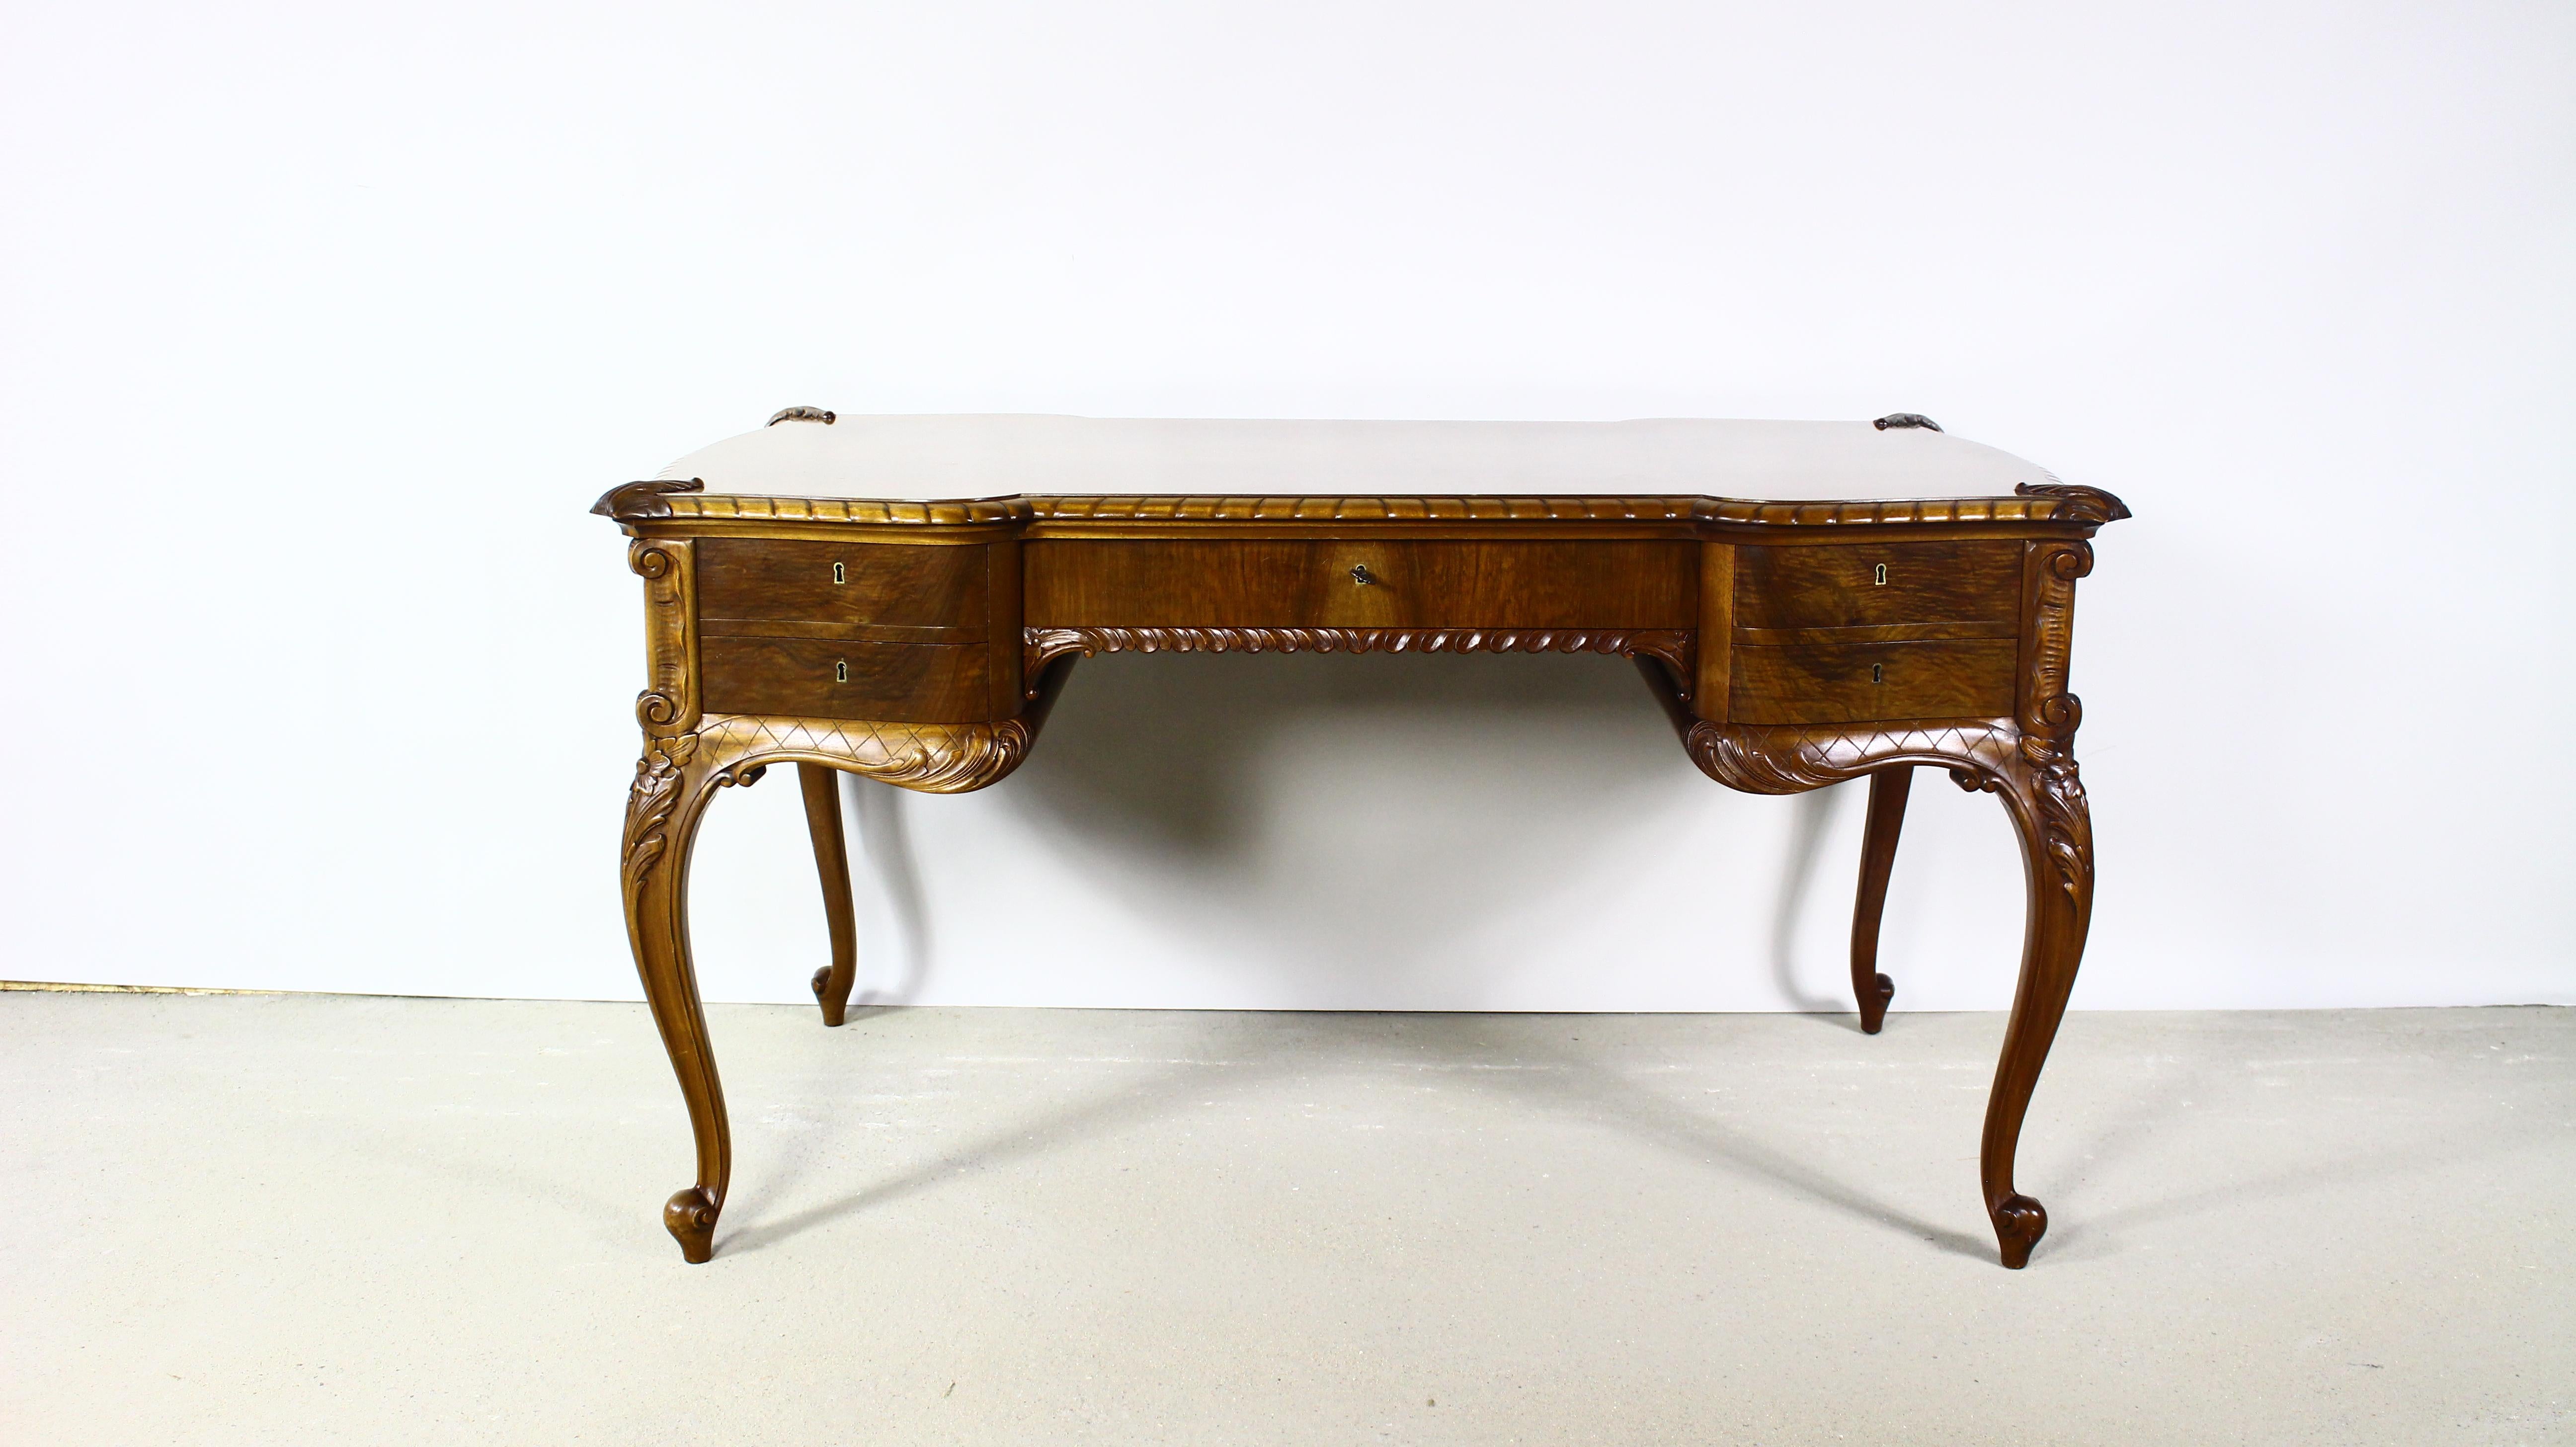 Beautiful antique desk in the style of Louis XV.
Rich decorations, ribbed rivets.
The corner decorated with plant motifs.
Two-sided desk, which can be used eg in the study room as a freestanding furniture.
Five drawers, key included.